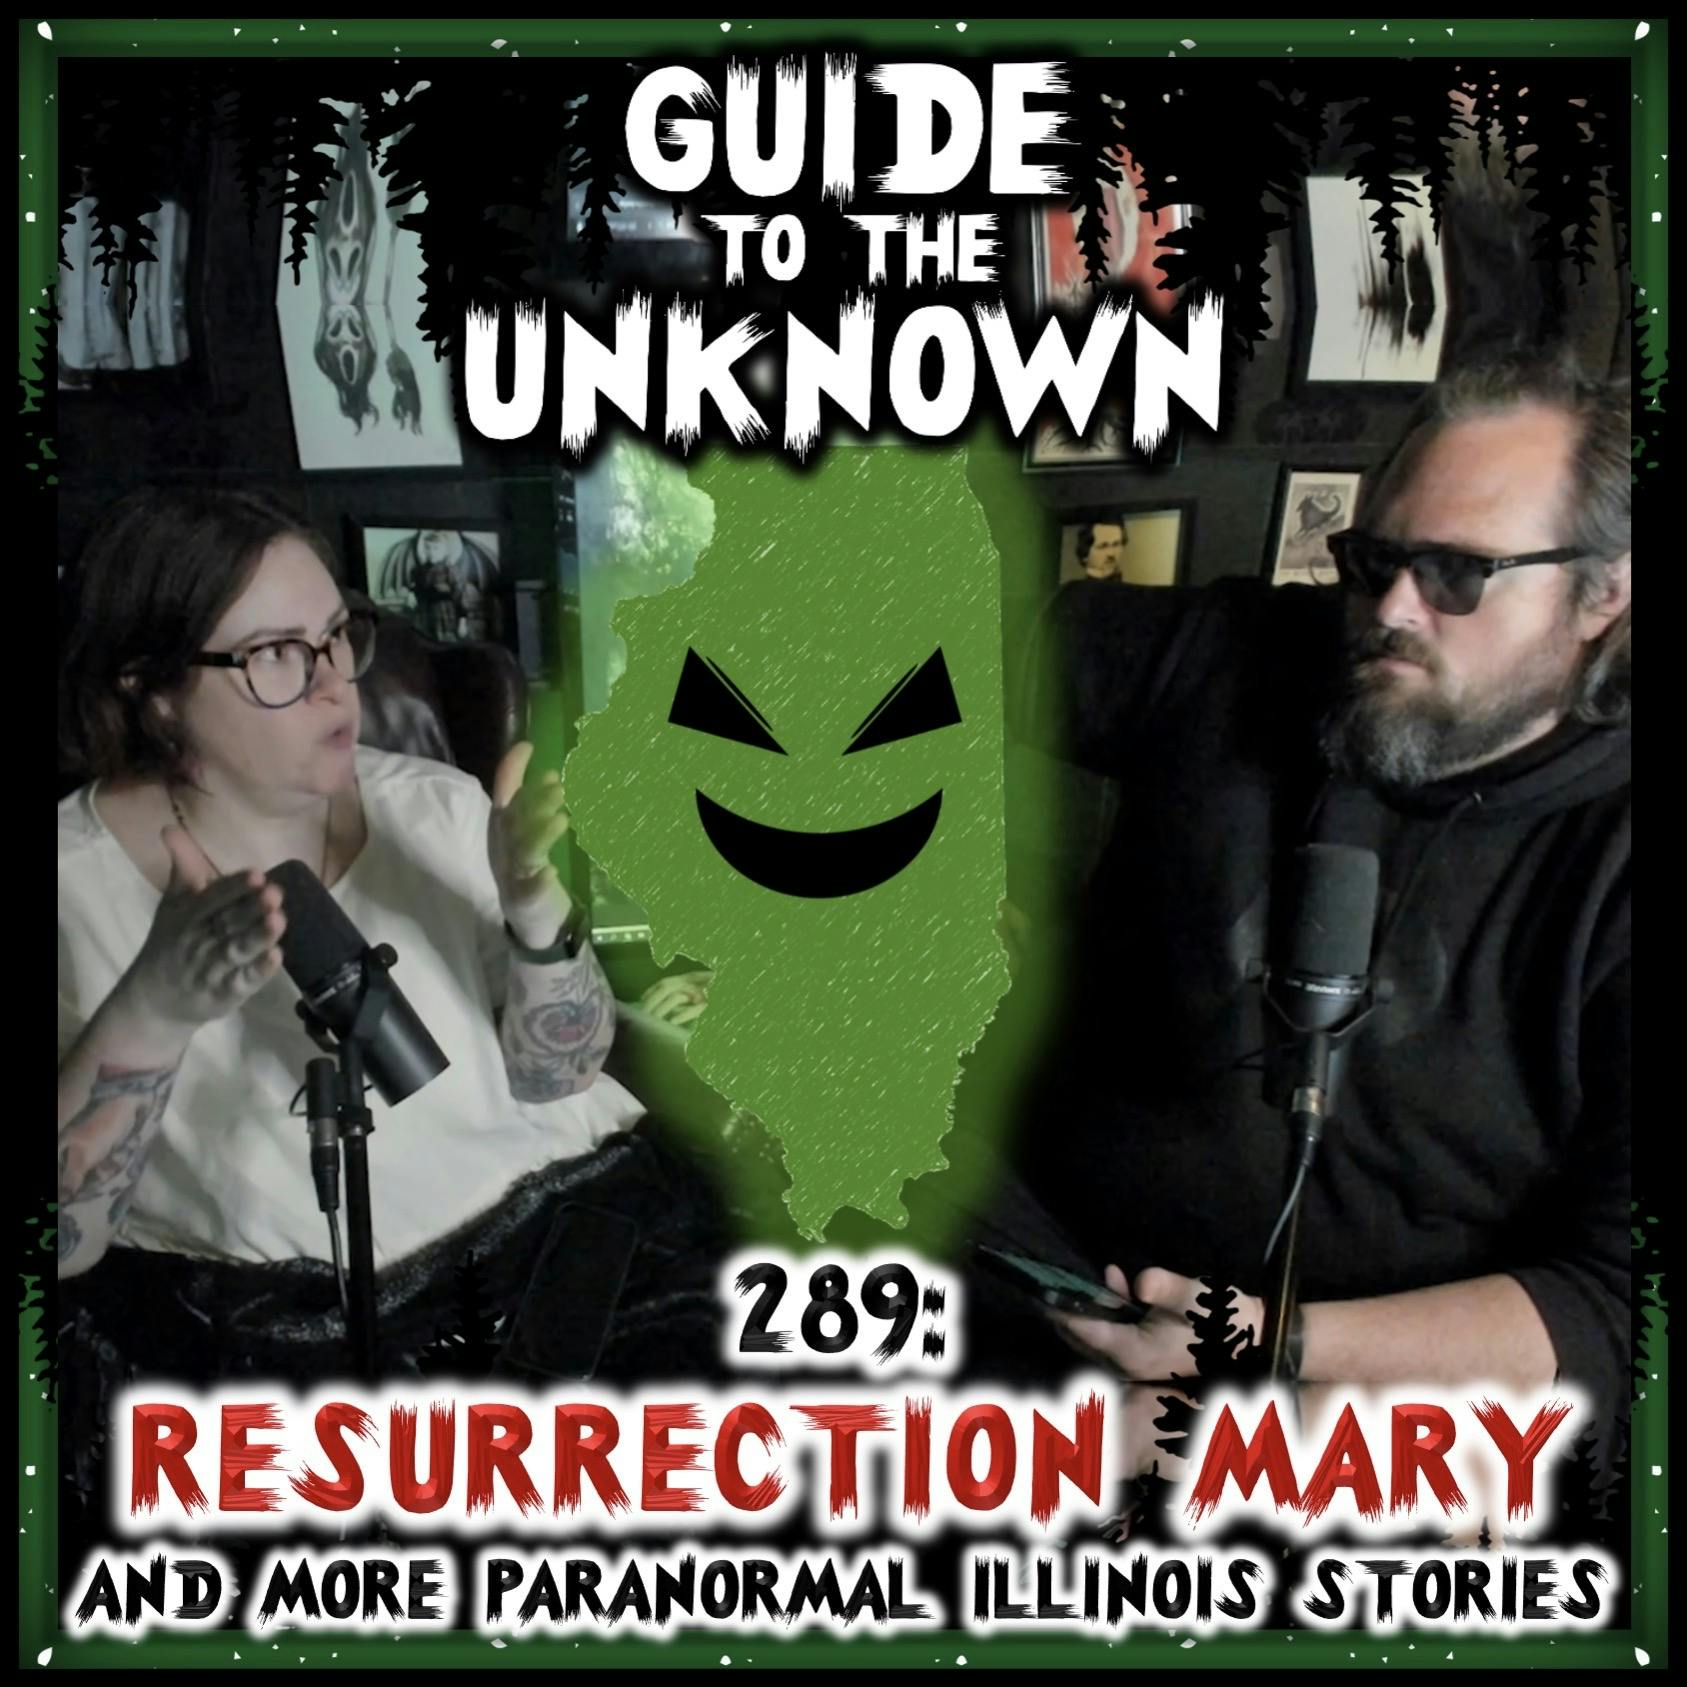 289: Resurrection Mary and other Paranormal Illinois Stories